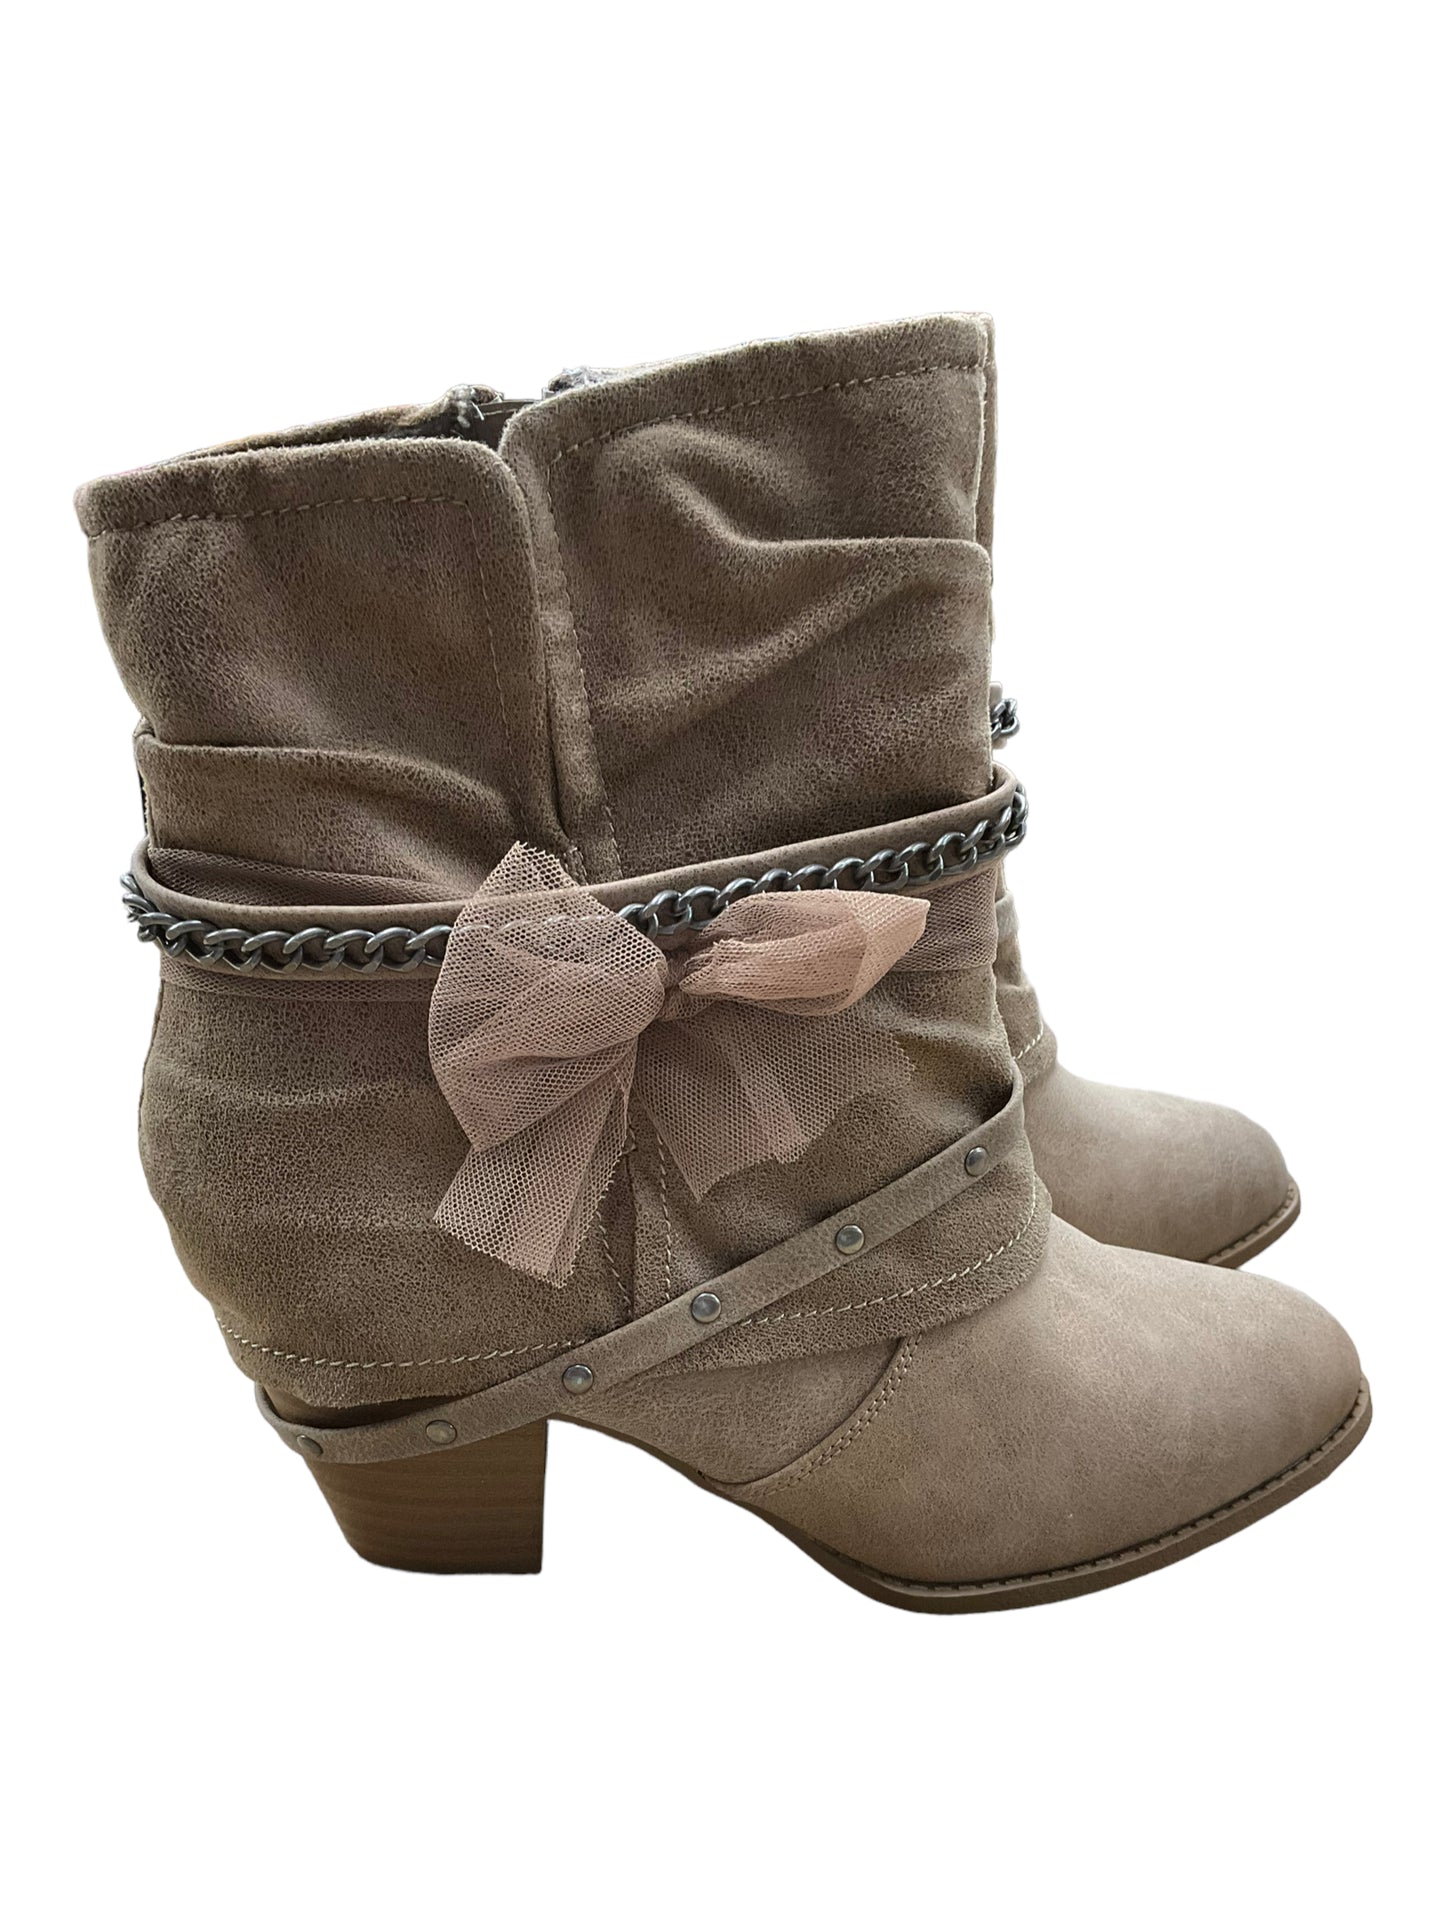 Boots Ankle Heels By Jelly Pop  Size: 11